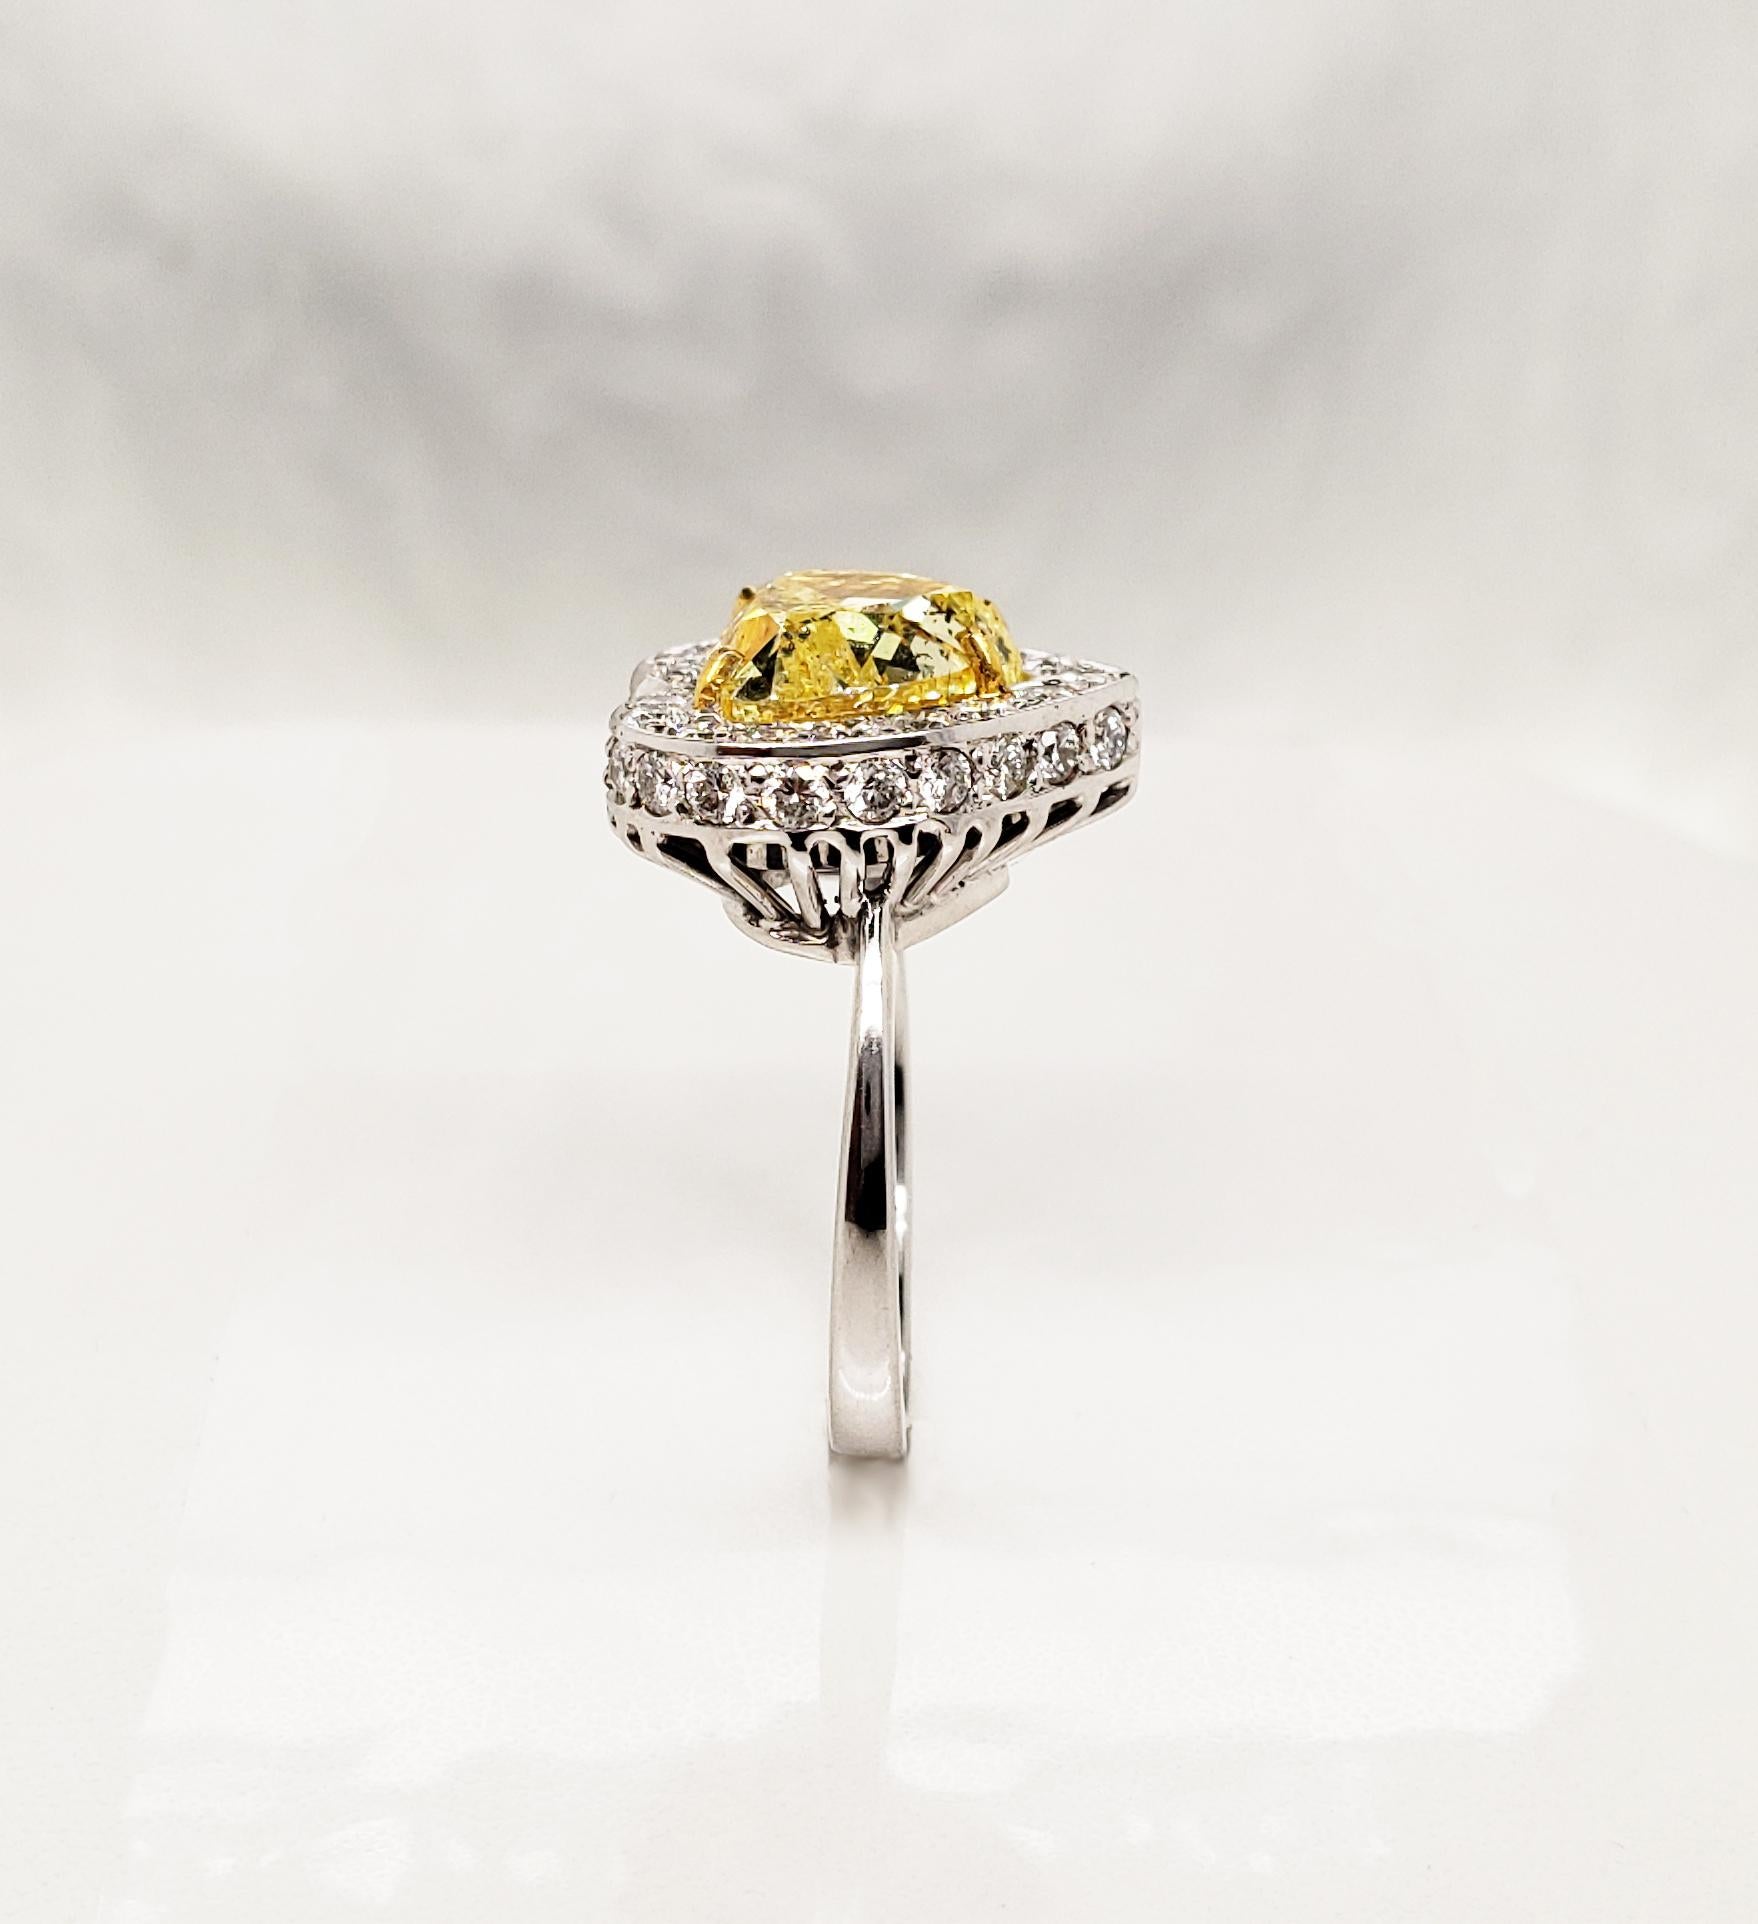 Scarselli GIA 5 carat Intense Yellow Heart Shape Diamond Ring in Platinum In New Condition For Sale In New York, NY